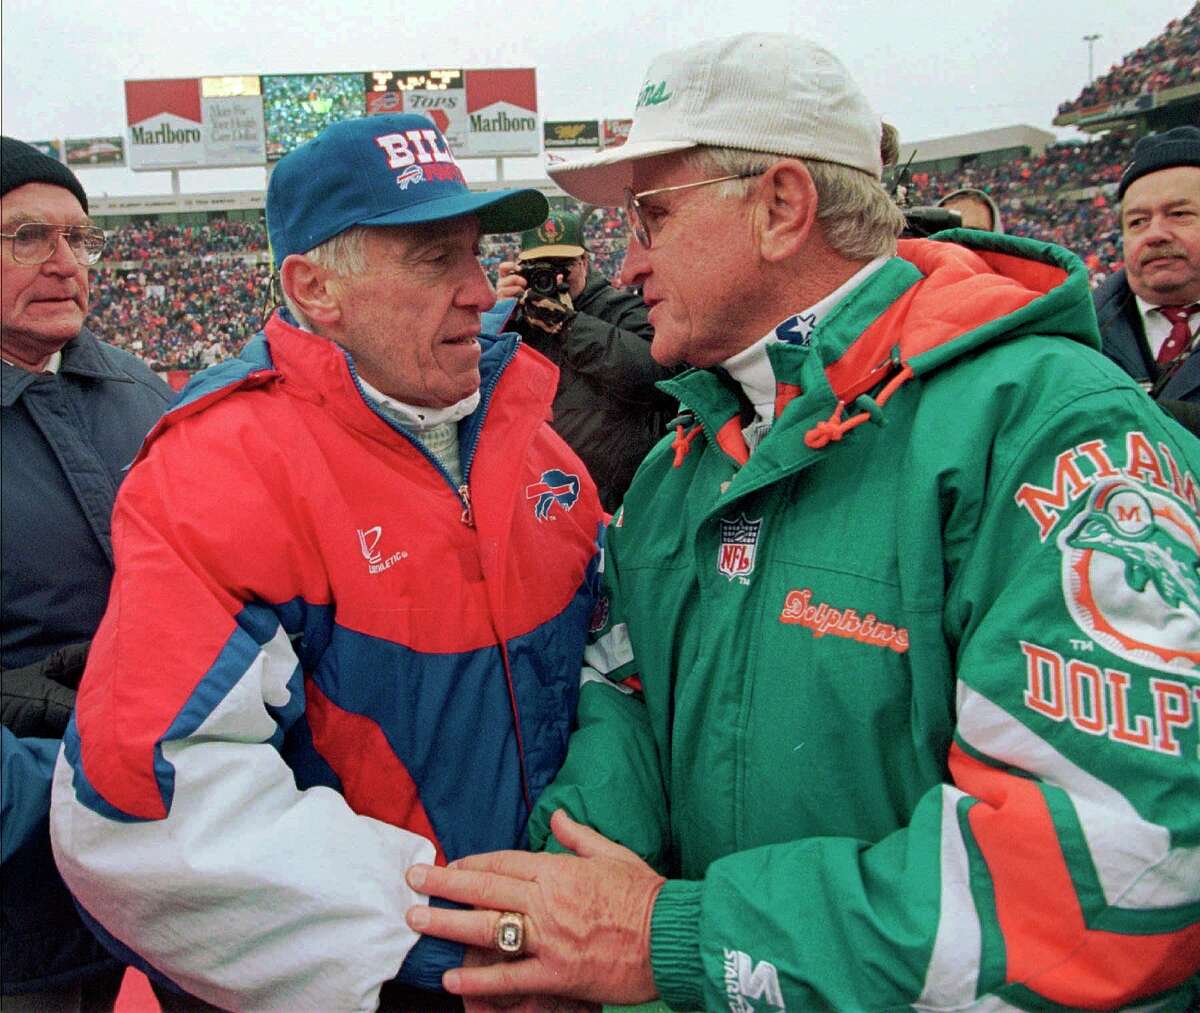 FILE - In this Dec. 30, 1995, file photo, Buffalo Bills head coach Marv Levy, left and Miami Dolphins head coach Don Shula speak at midfield after the Bills beat the Dolphins in Shula's final game as head coach, at Rich Stadium in Orchard Park, N.Y. Shula, who won the most games of any NFL coach and led the Miami Dolphins to the only perfect season in league history, died Monday, May 4, 2020, at his home in Indian Creek, Fla., the team said. He was 90.(AP Photo/Bill Sikes, File)